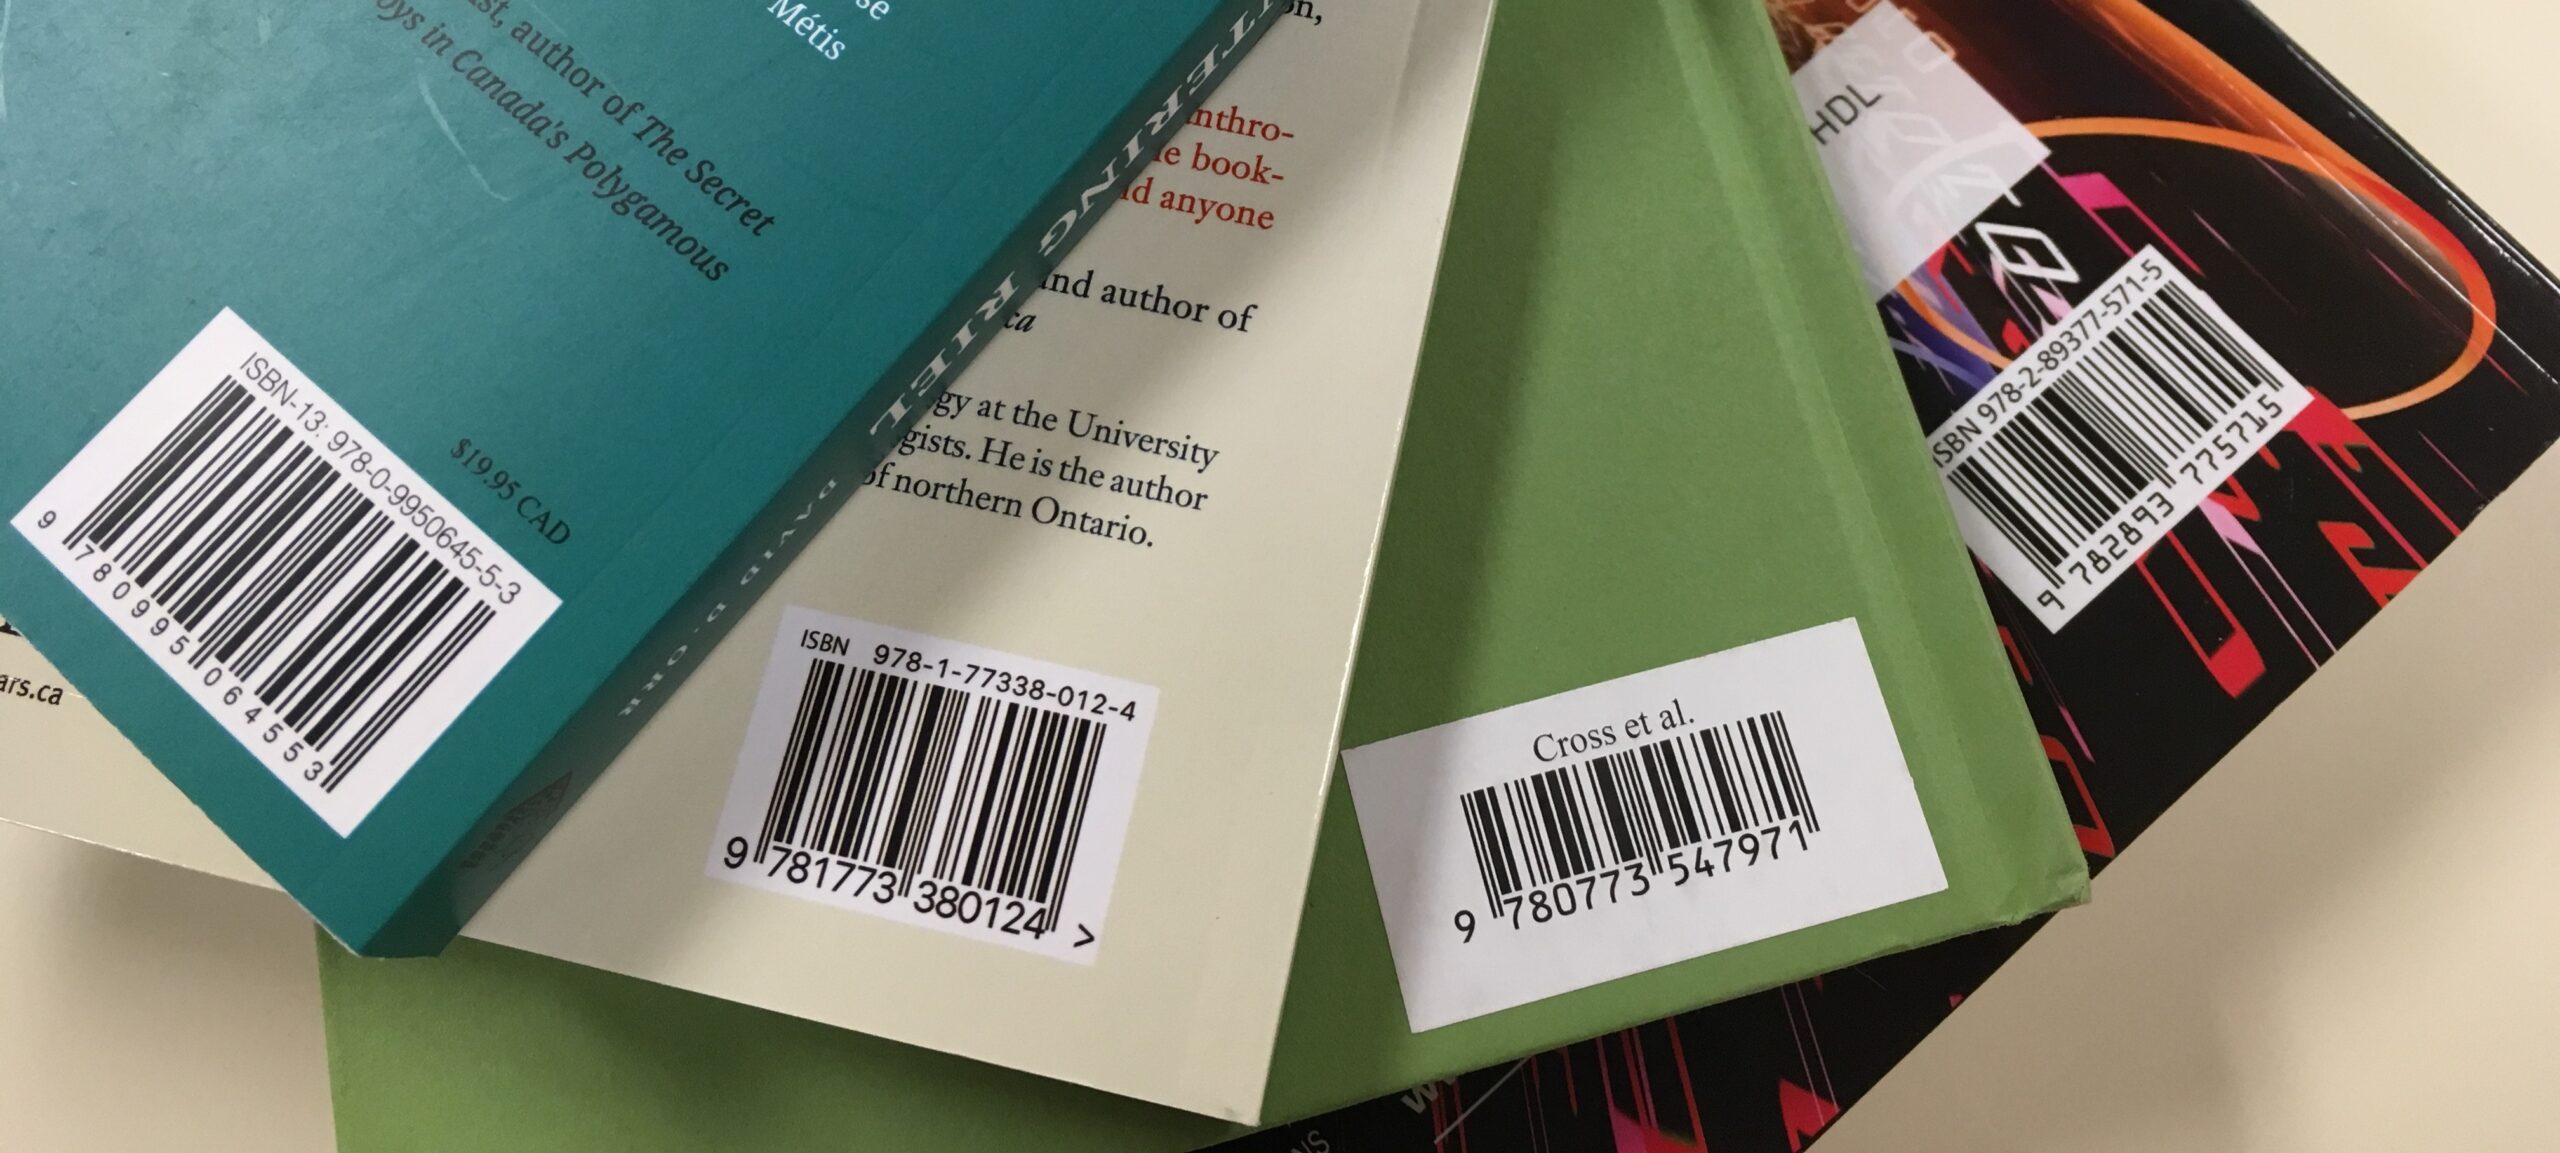 books with isbn